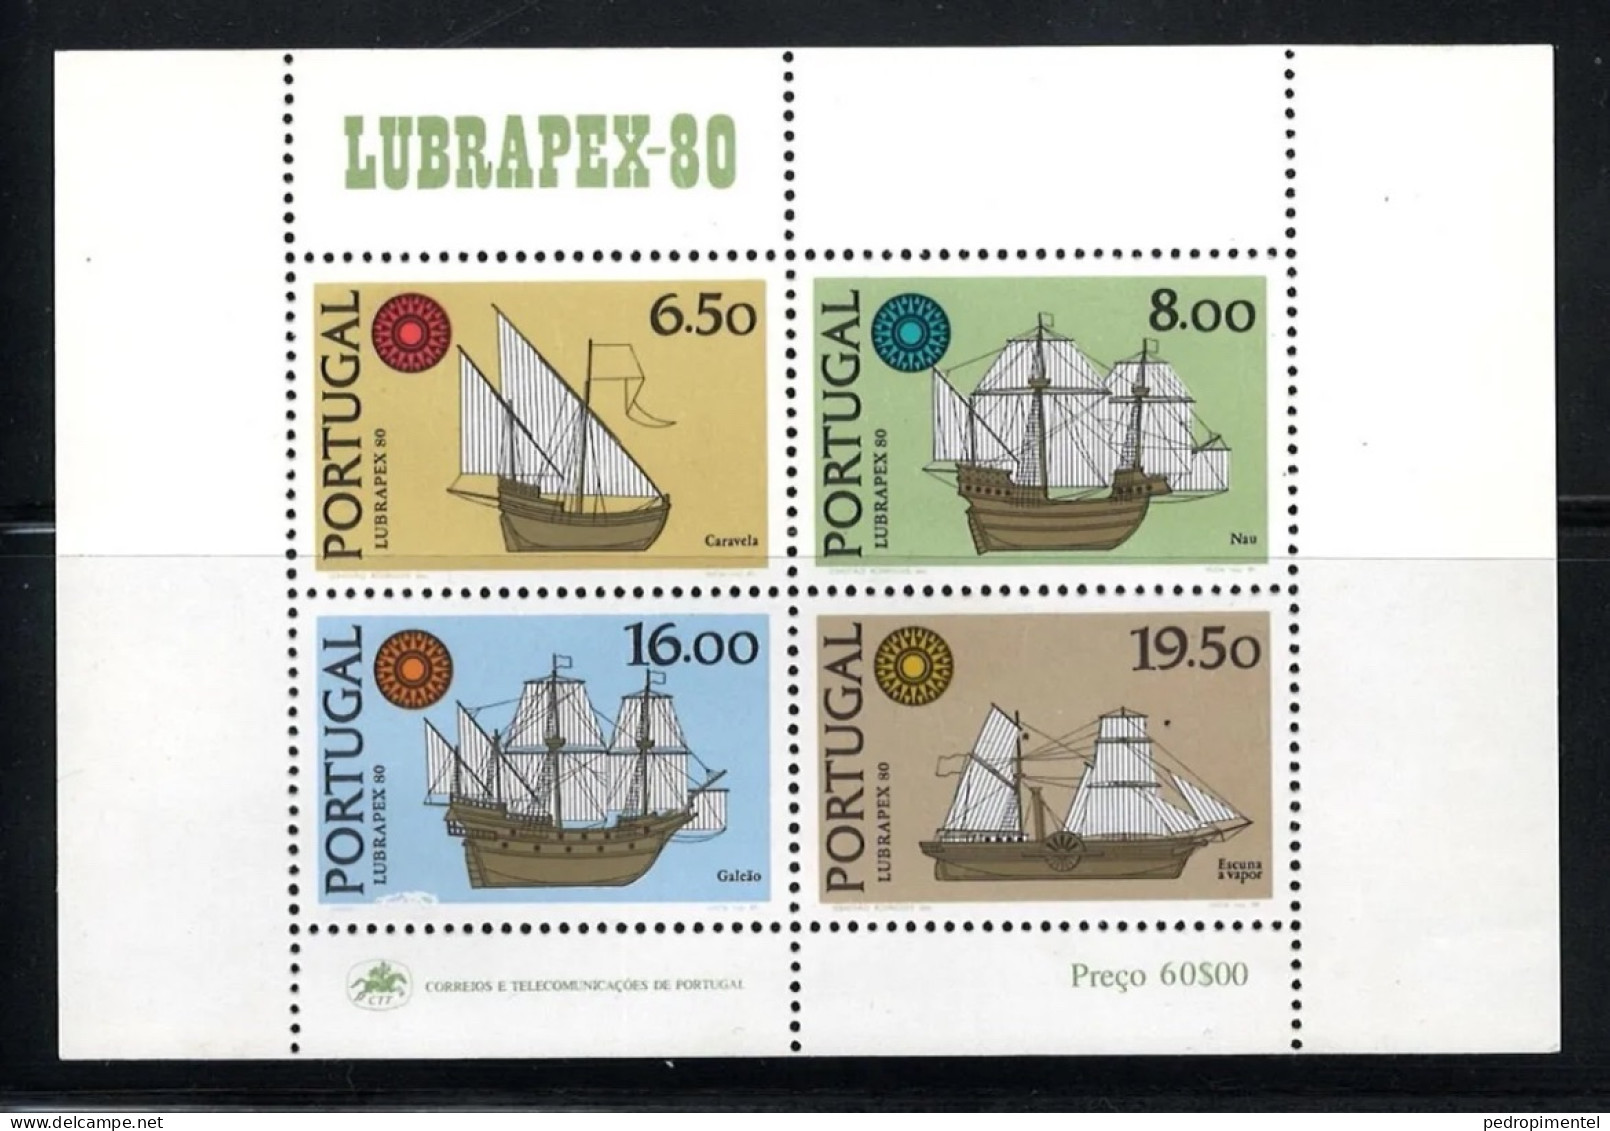 Portugal Stamps 1980 "Lubrapex 80" Condition MNH #1492-1495 (minisheet+stamps) - Unused Stamps